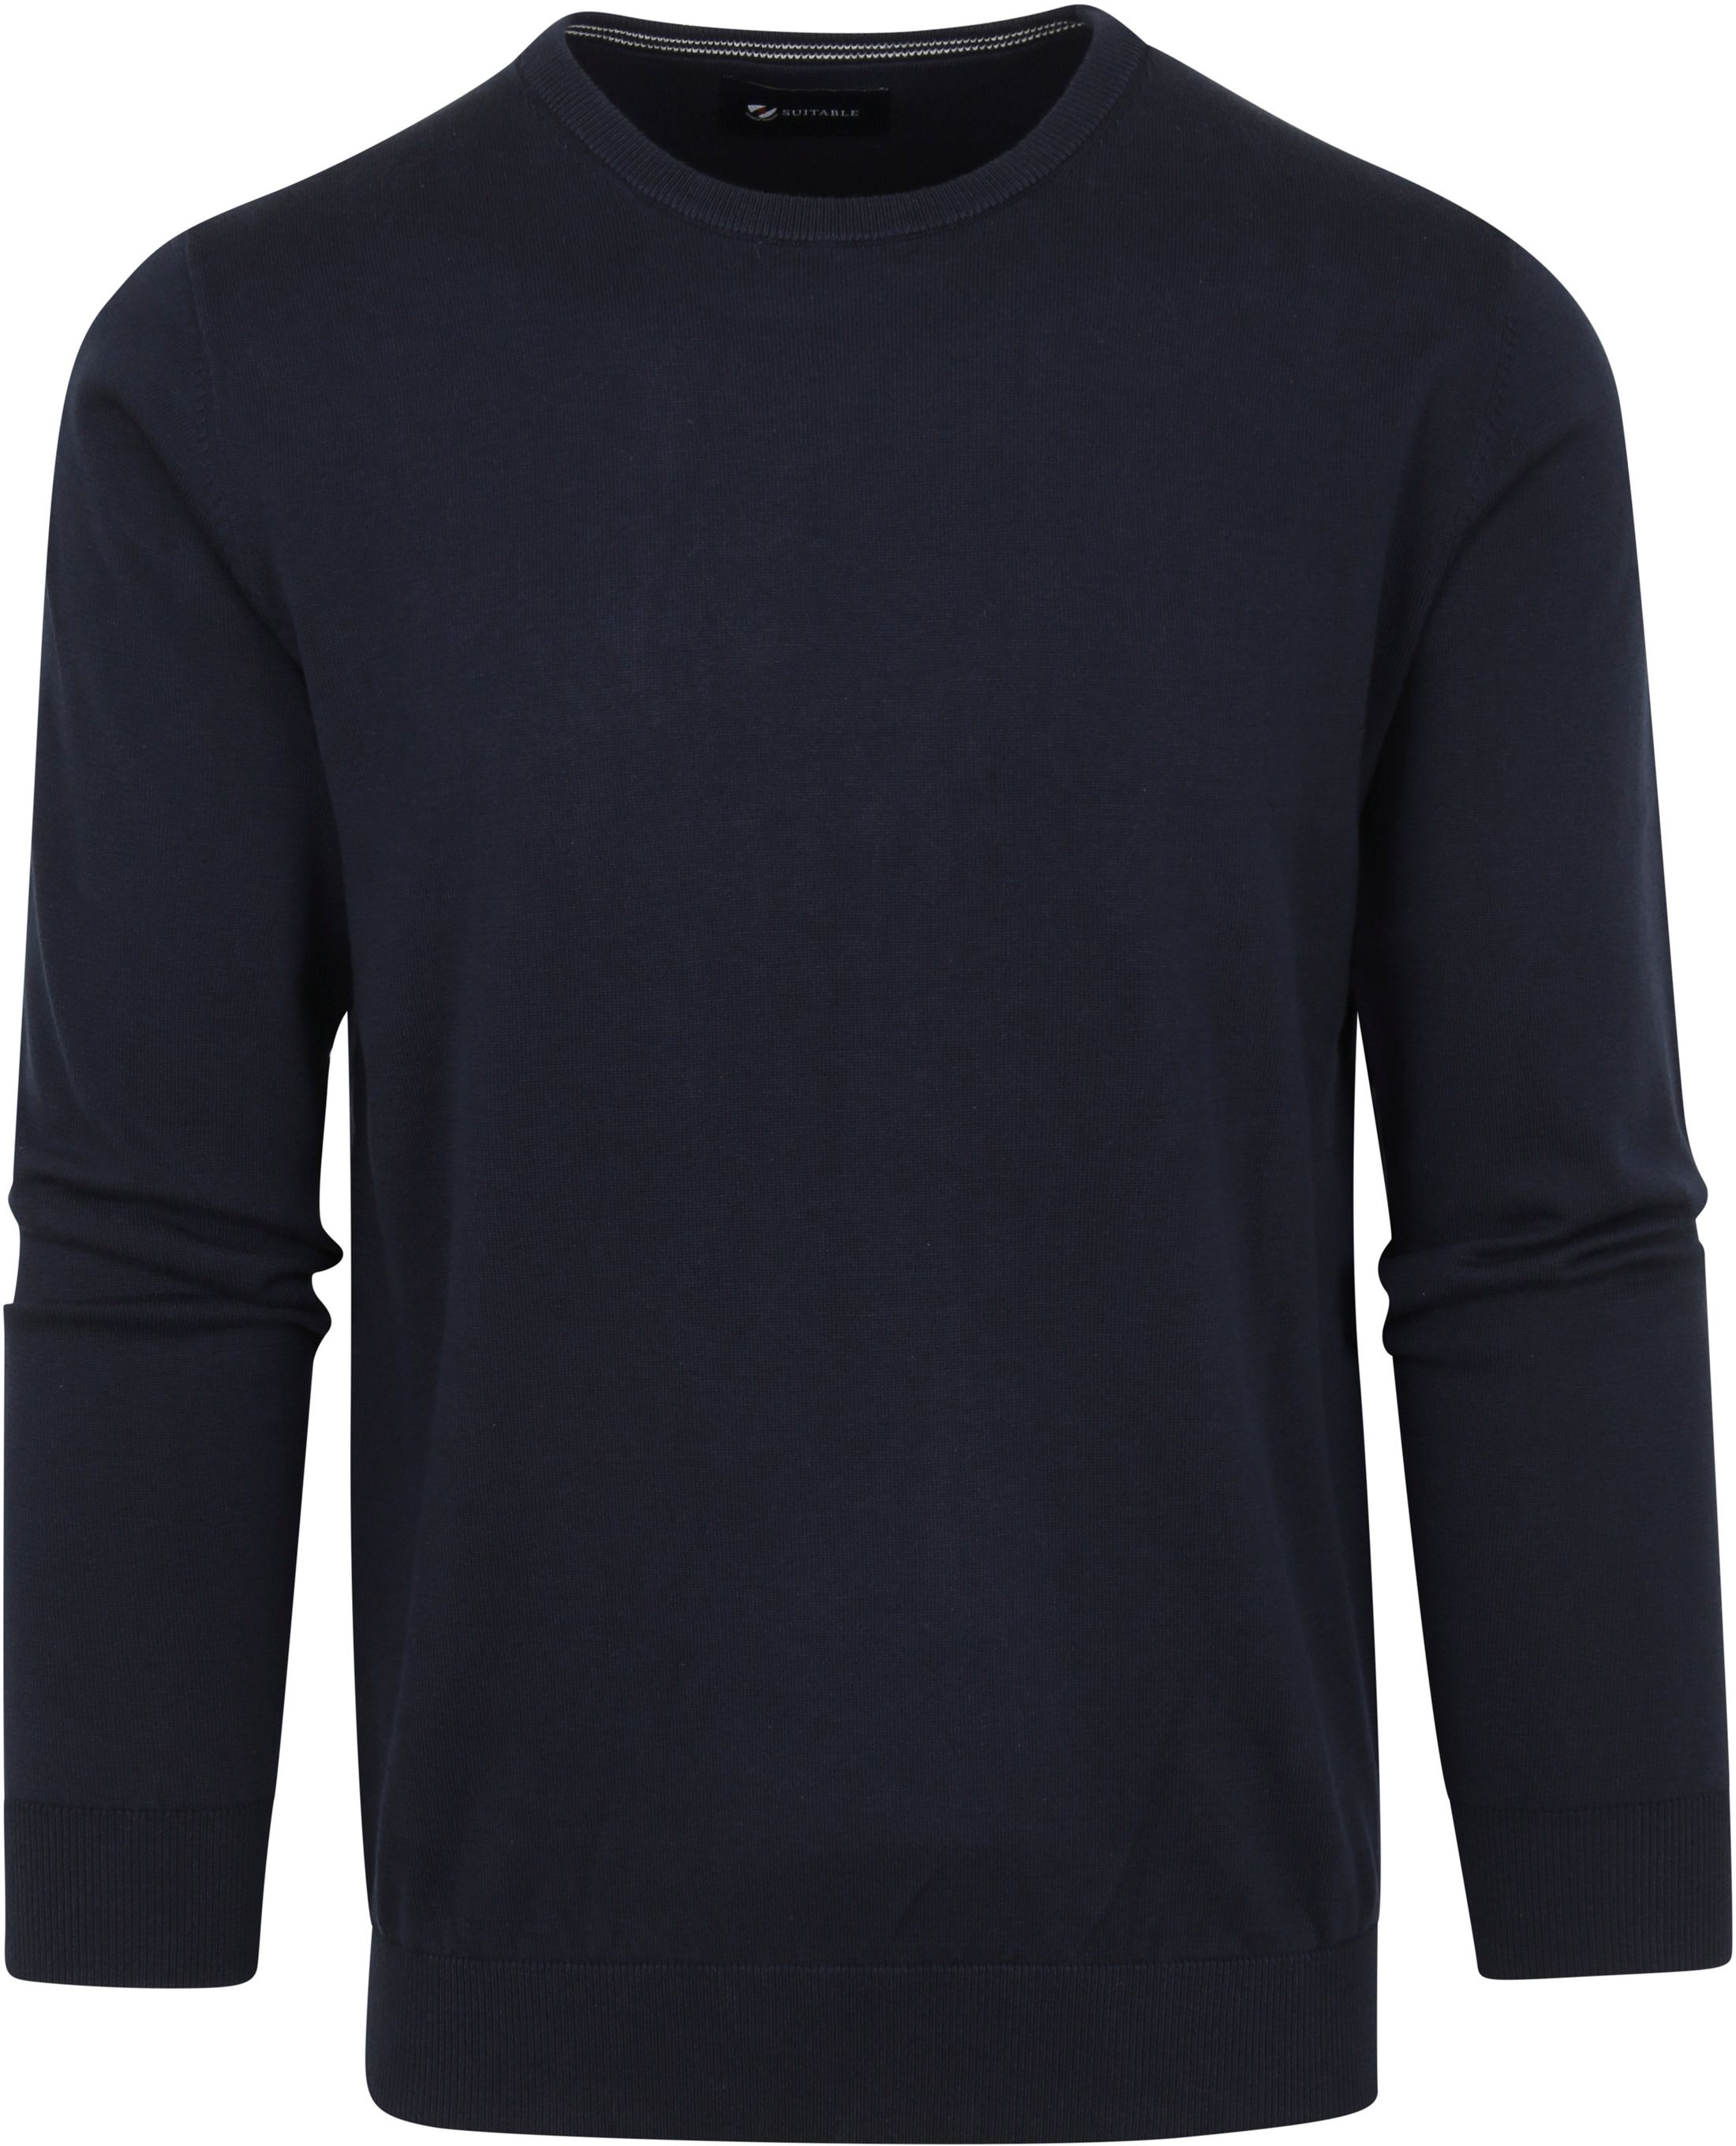 Suitable Oini Pullover O-Neck Navy Blue Dark Blue size 3XL